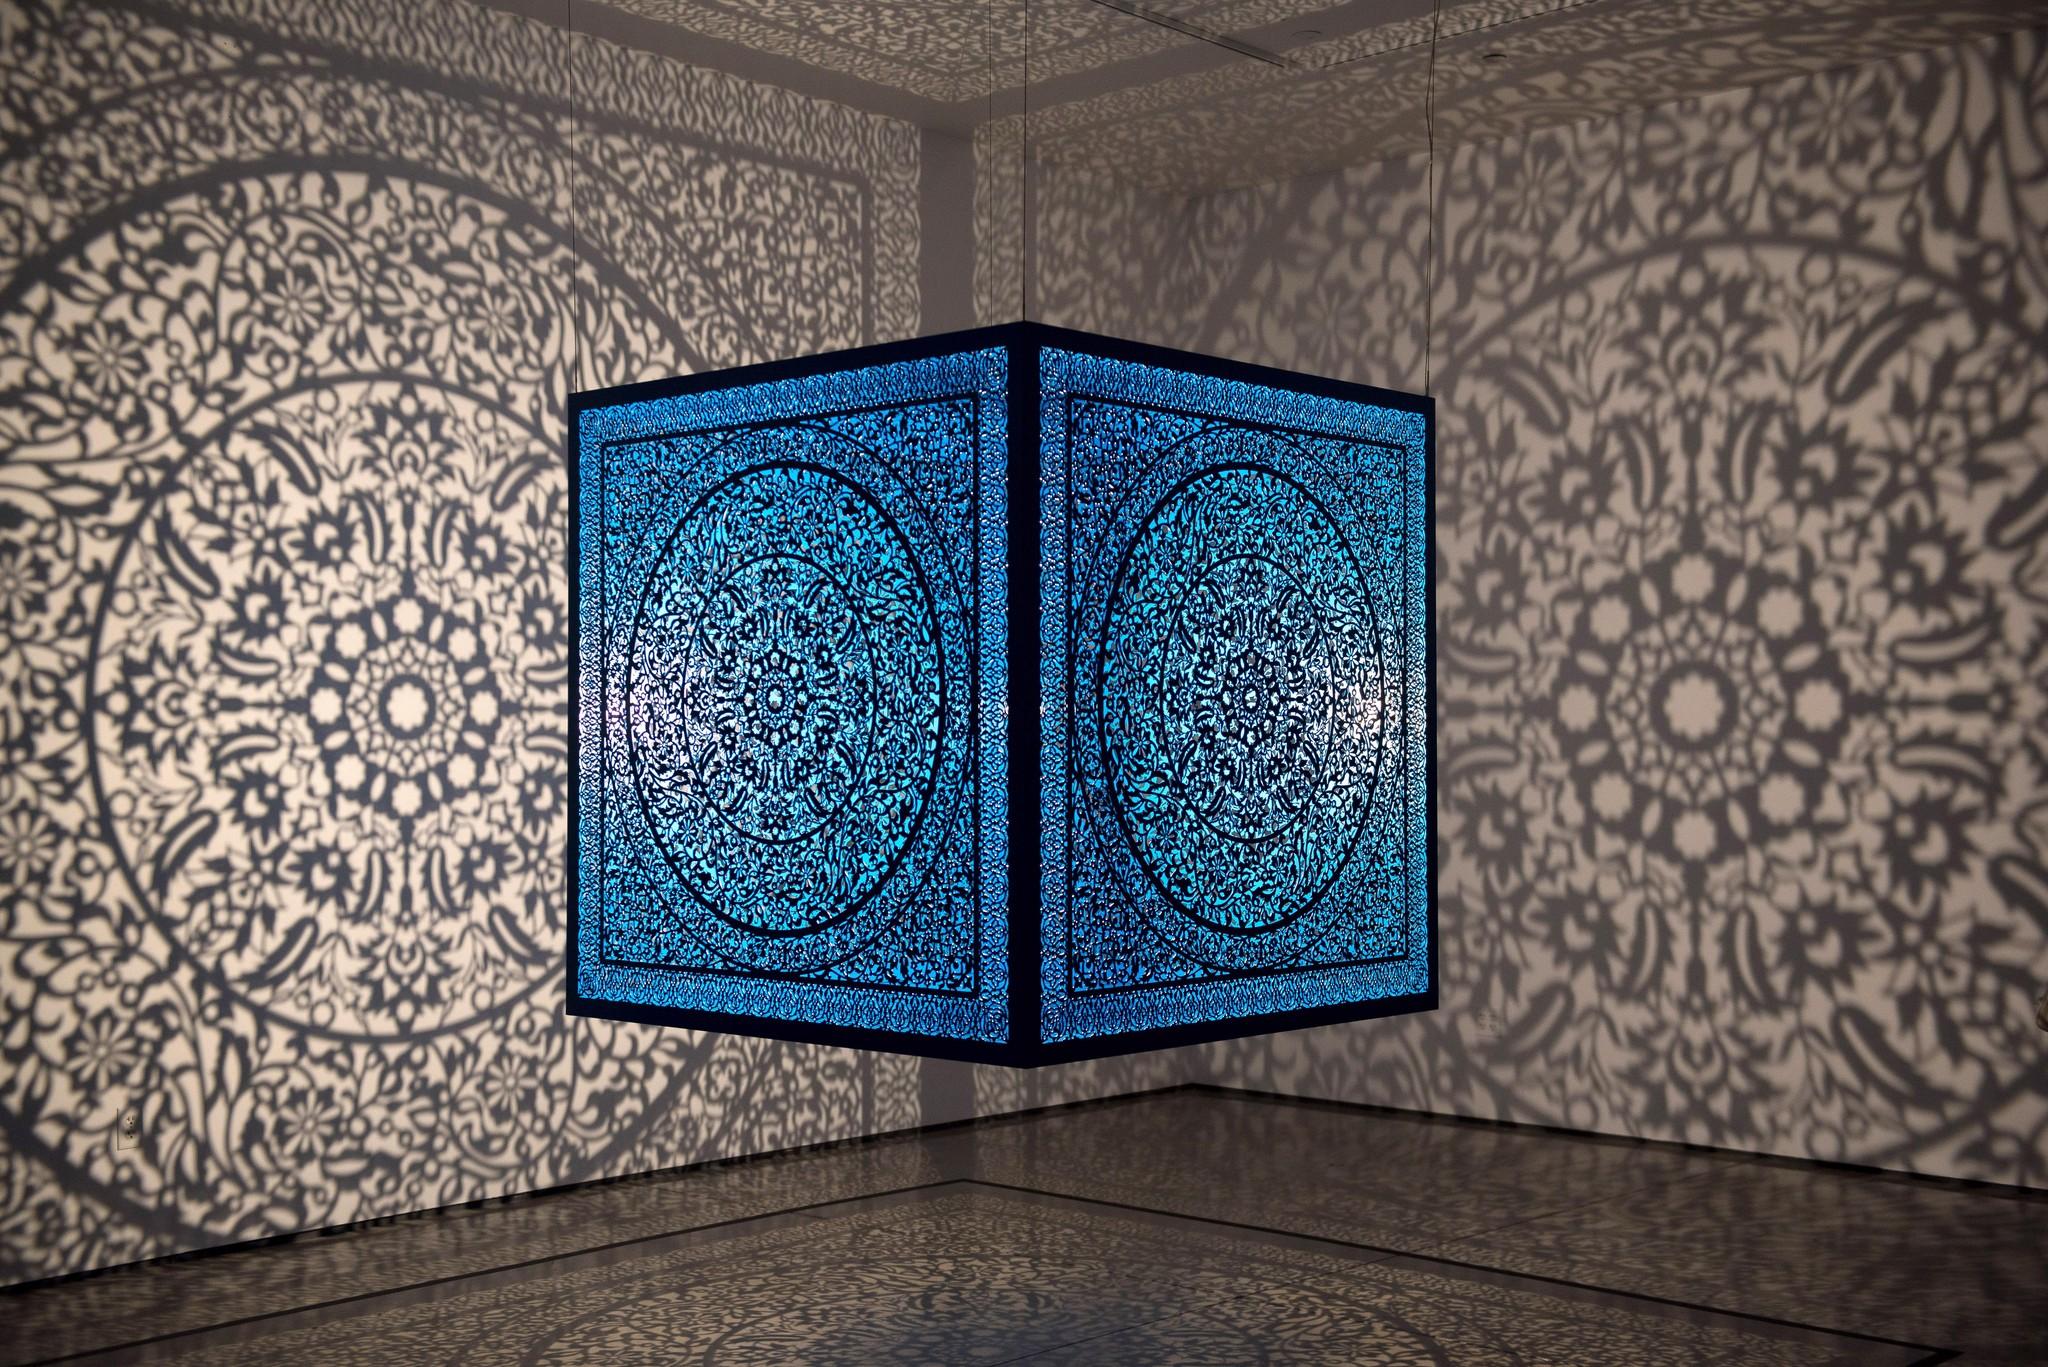 A blue steel cube with intricate floral-inspired cutouts suspended from the ceiling and casting patterned light onto the gray walls of a room.